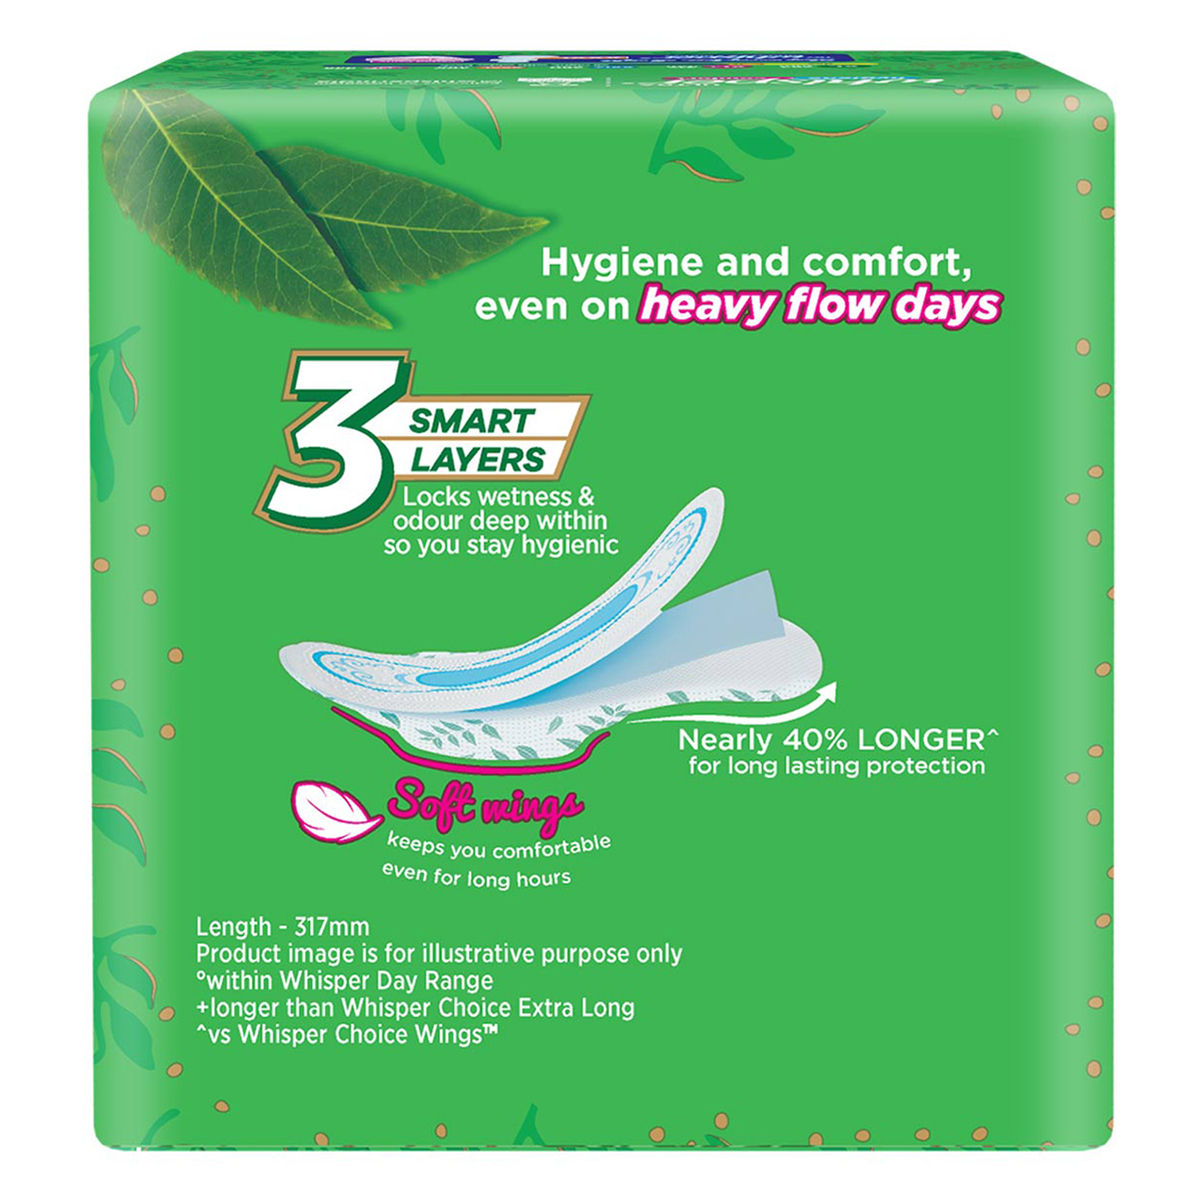 Pro-ease Go XL 50 mm Longer XL - 6+6 Pads Sanitary Pad, Buy Women Hygiene  products online in India